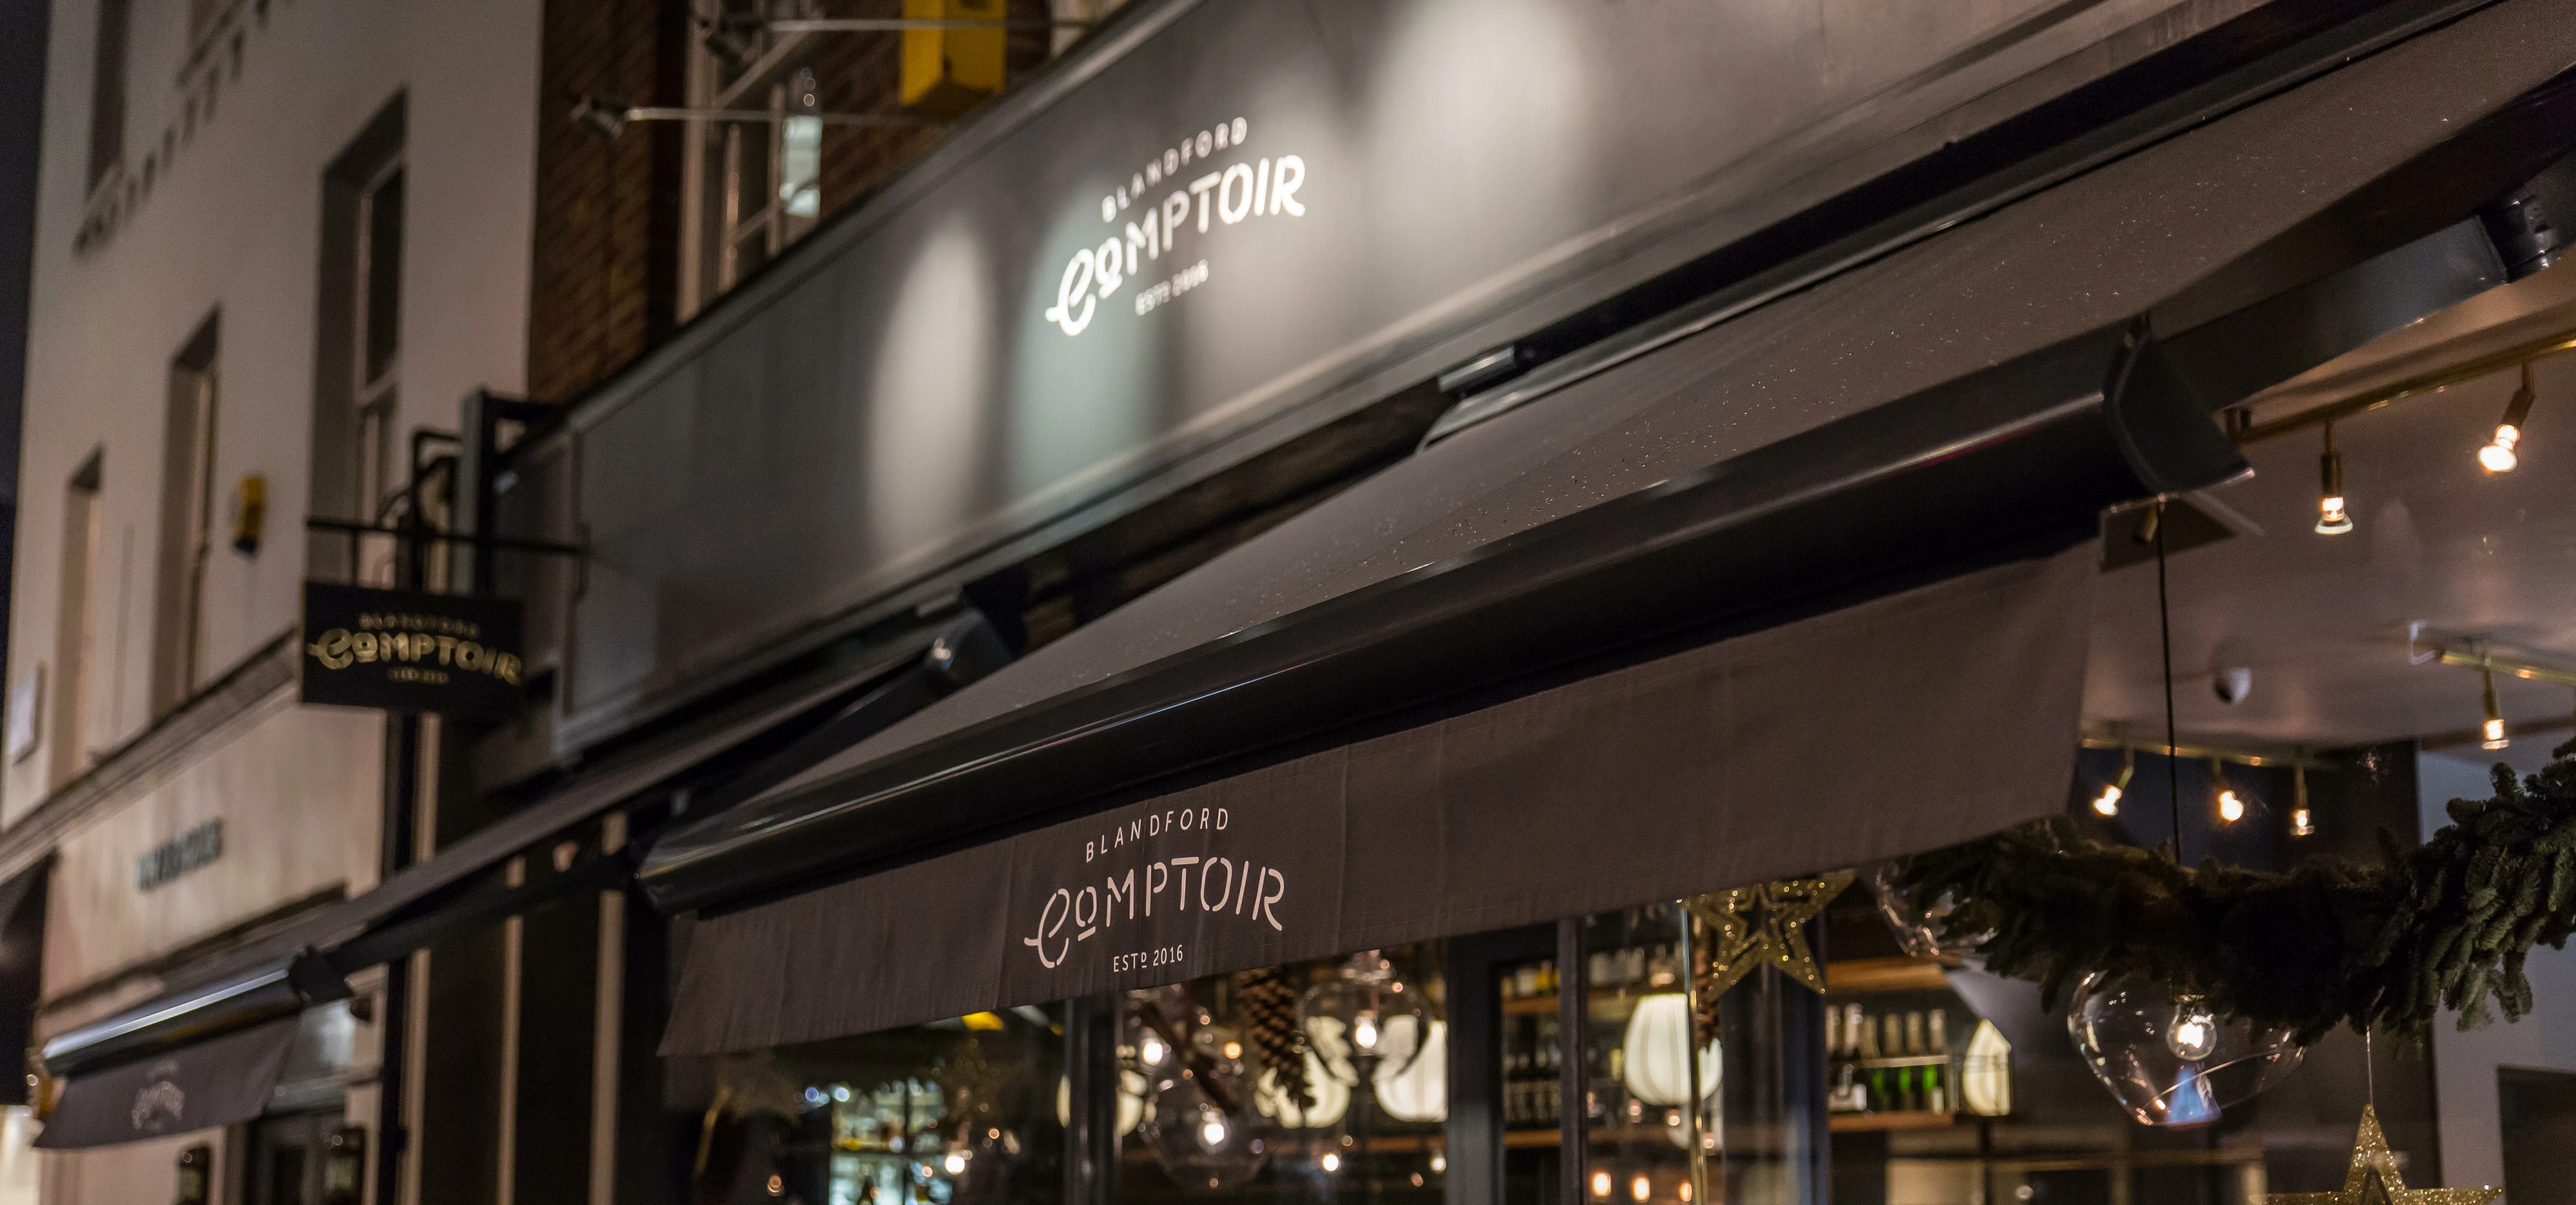 The Blandford Comptoir bistro with the A101: SmartBox